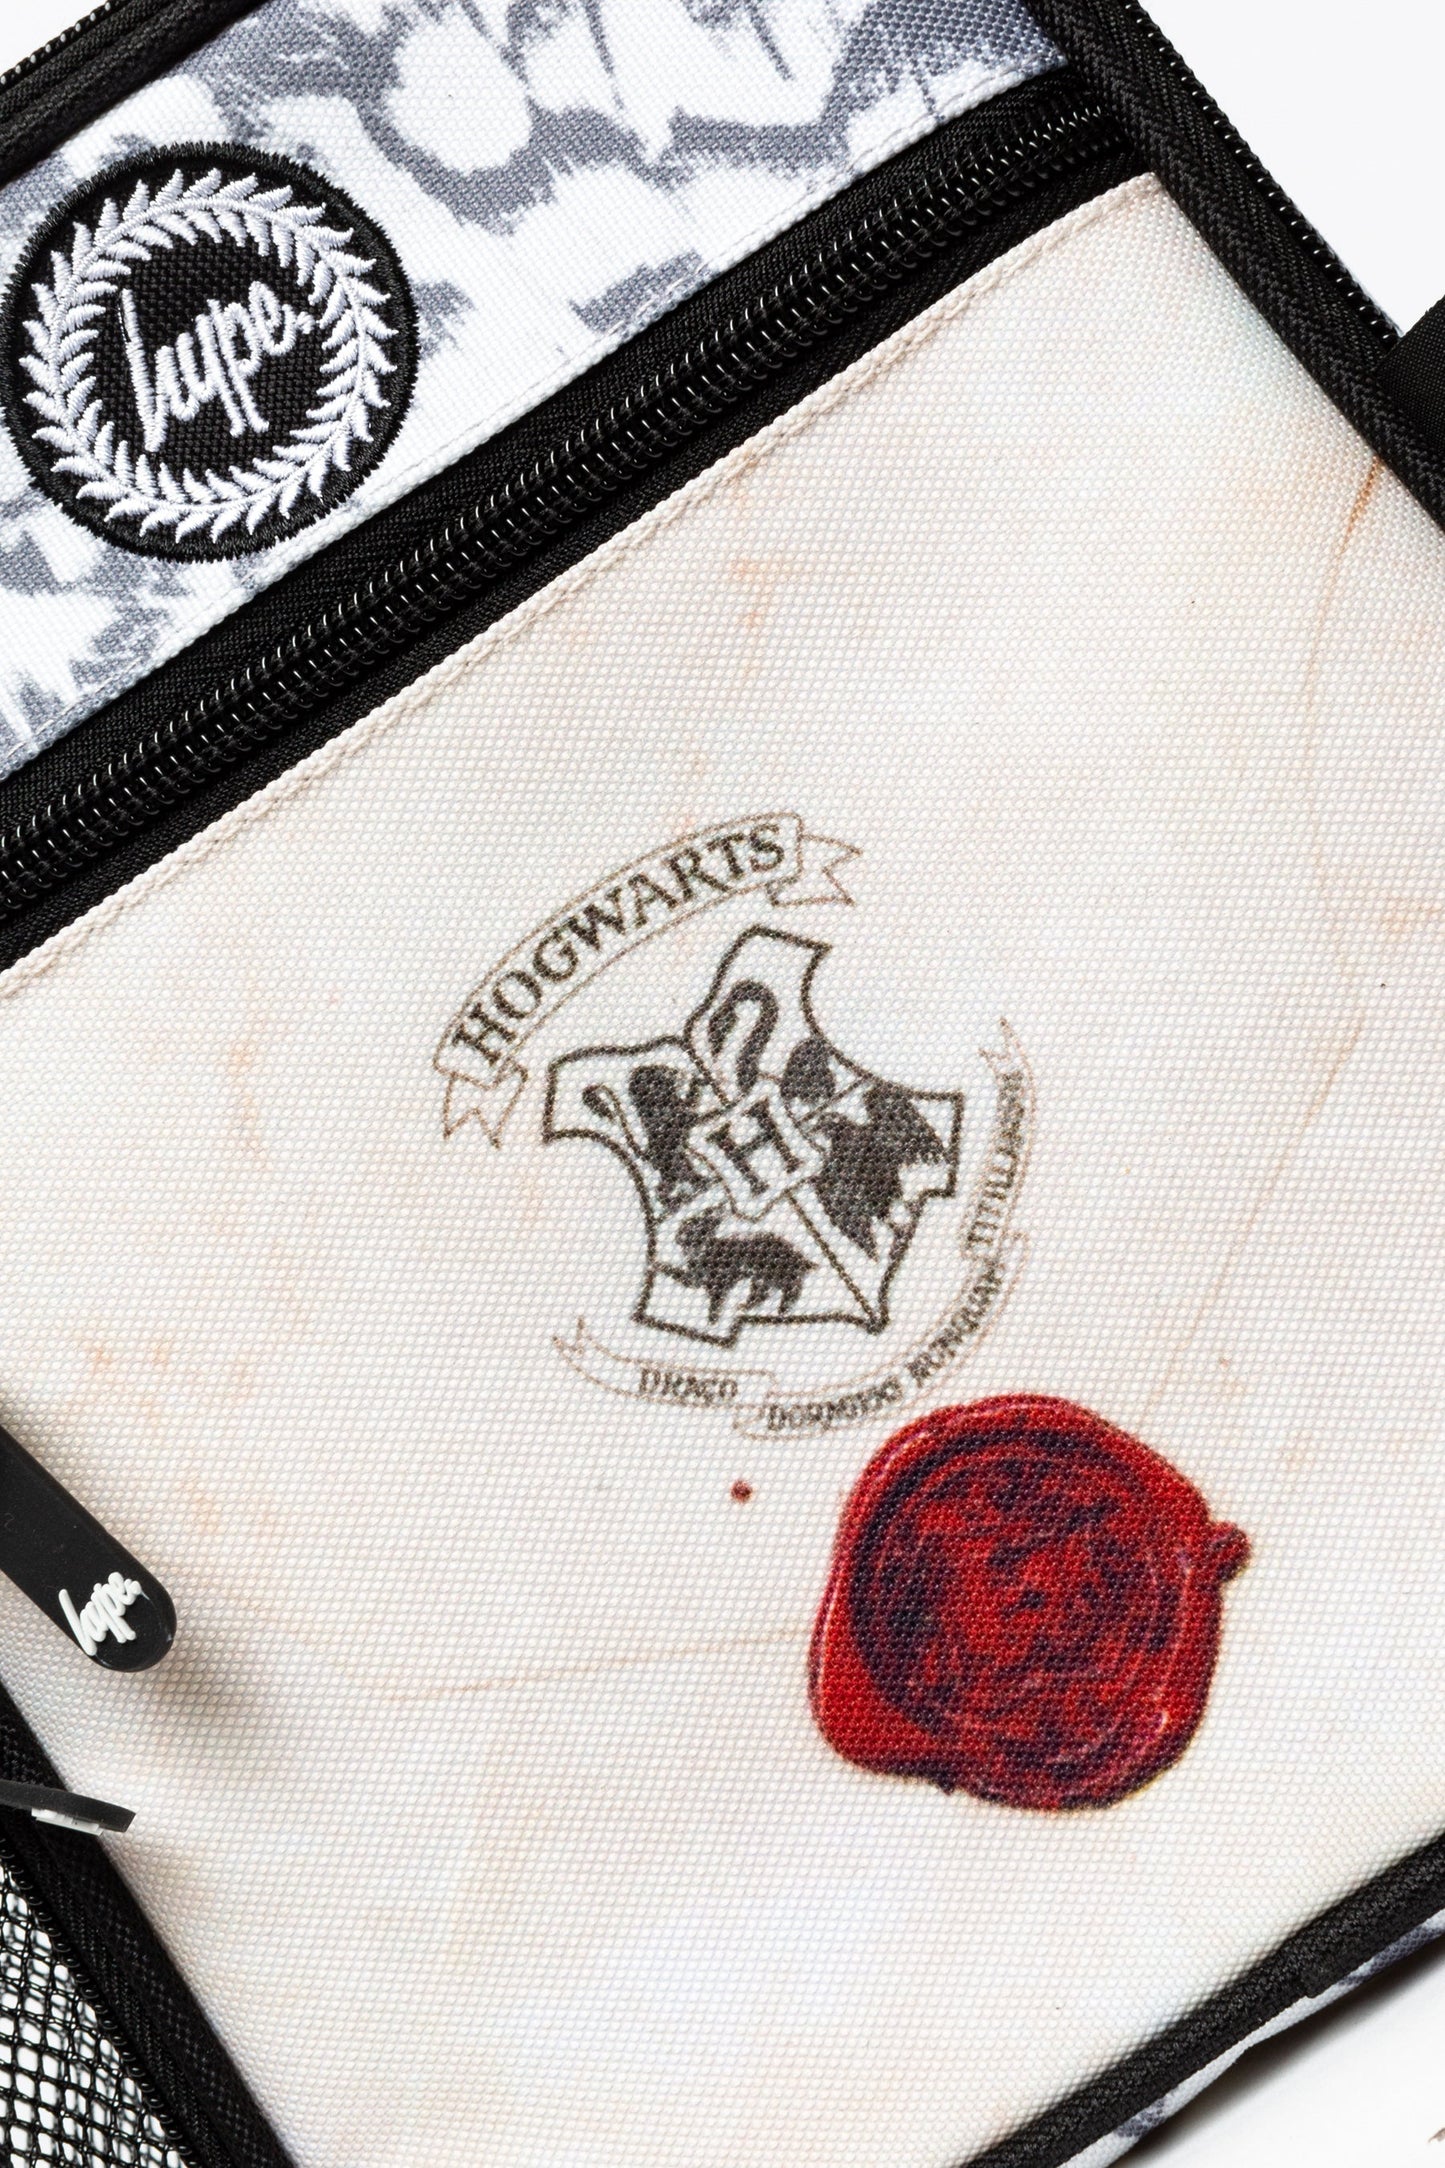 HARRY POTTER X HYPE. HEDWIG LUNCH BOX